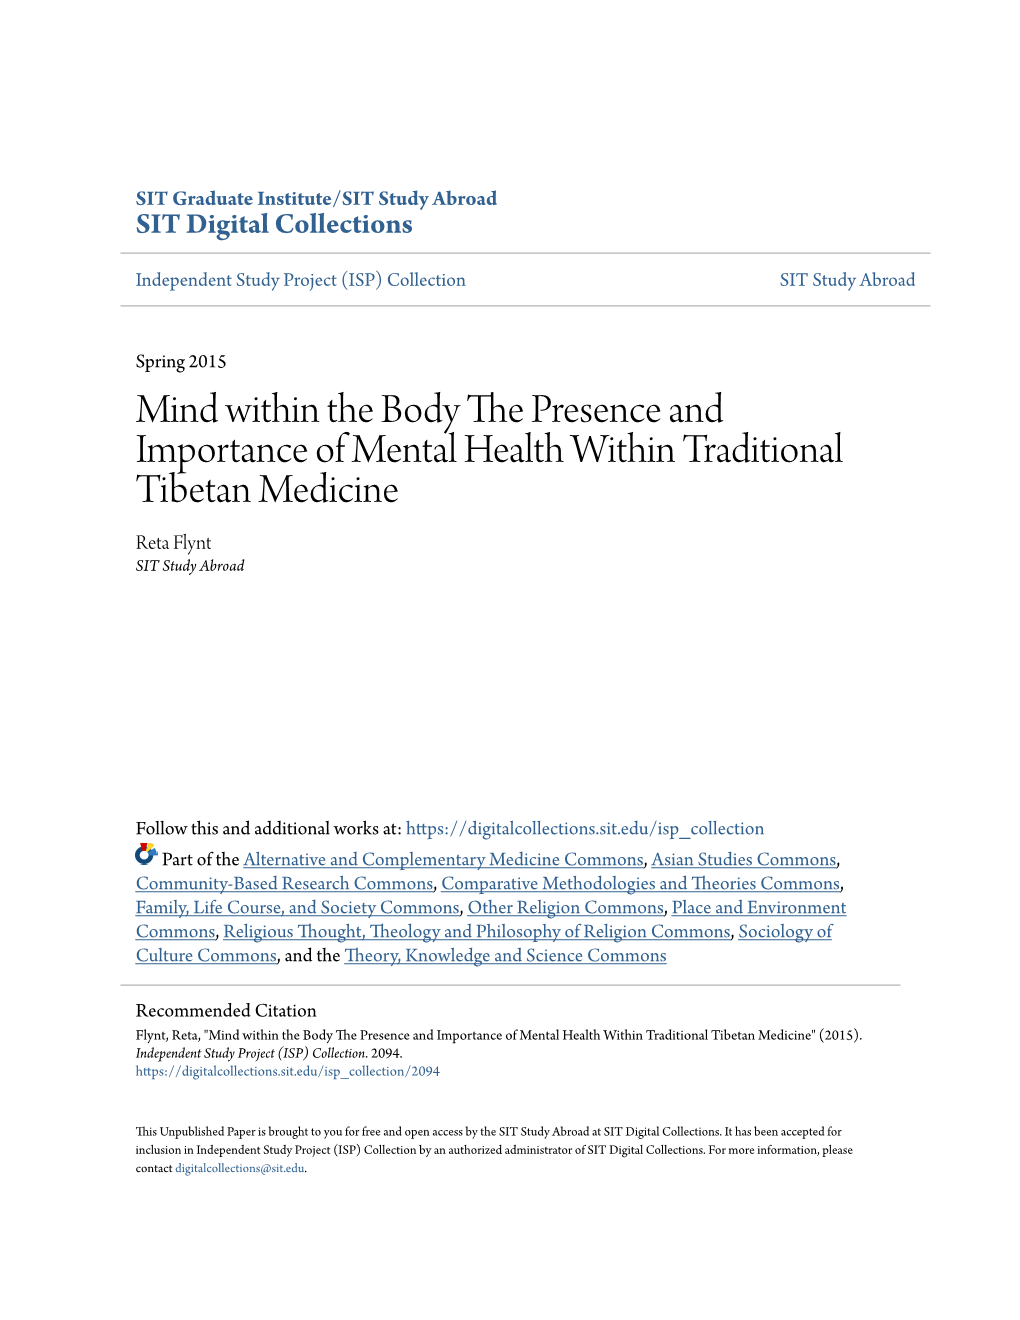 Mind Within the Body the Presence and Importance of Mental Health Within Traditional Tibetan Medicine